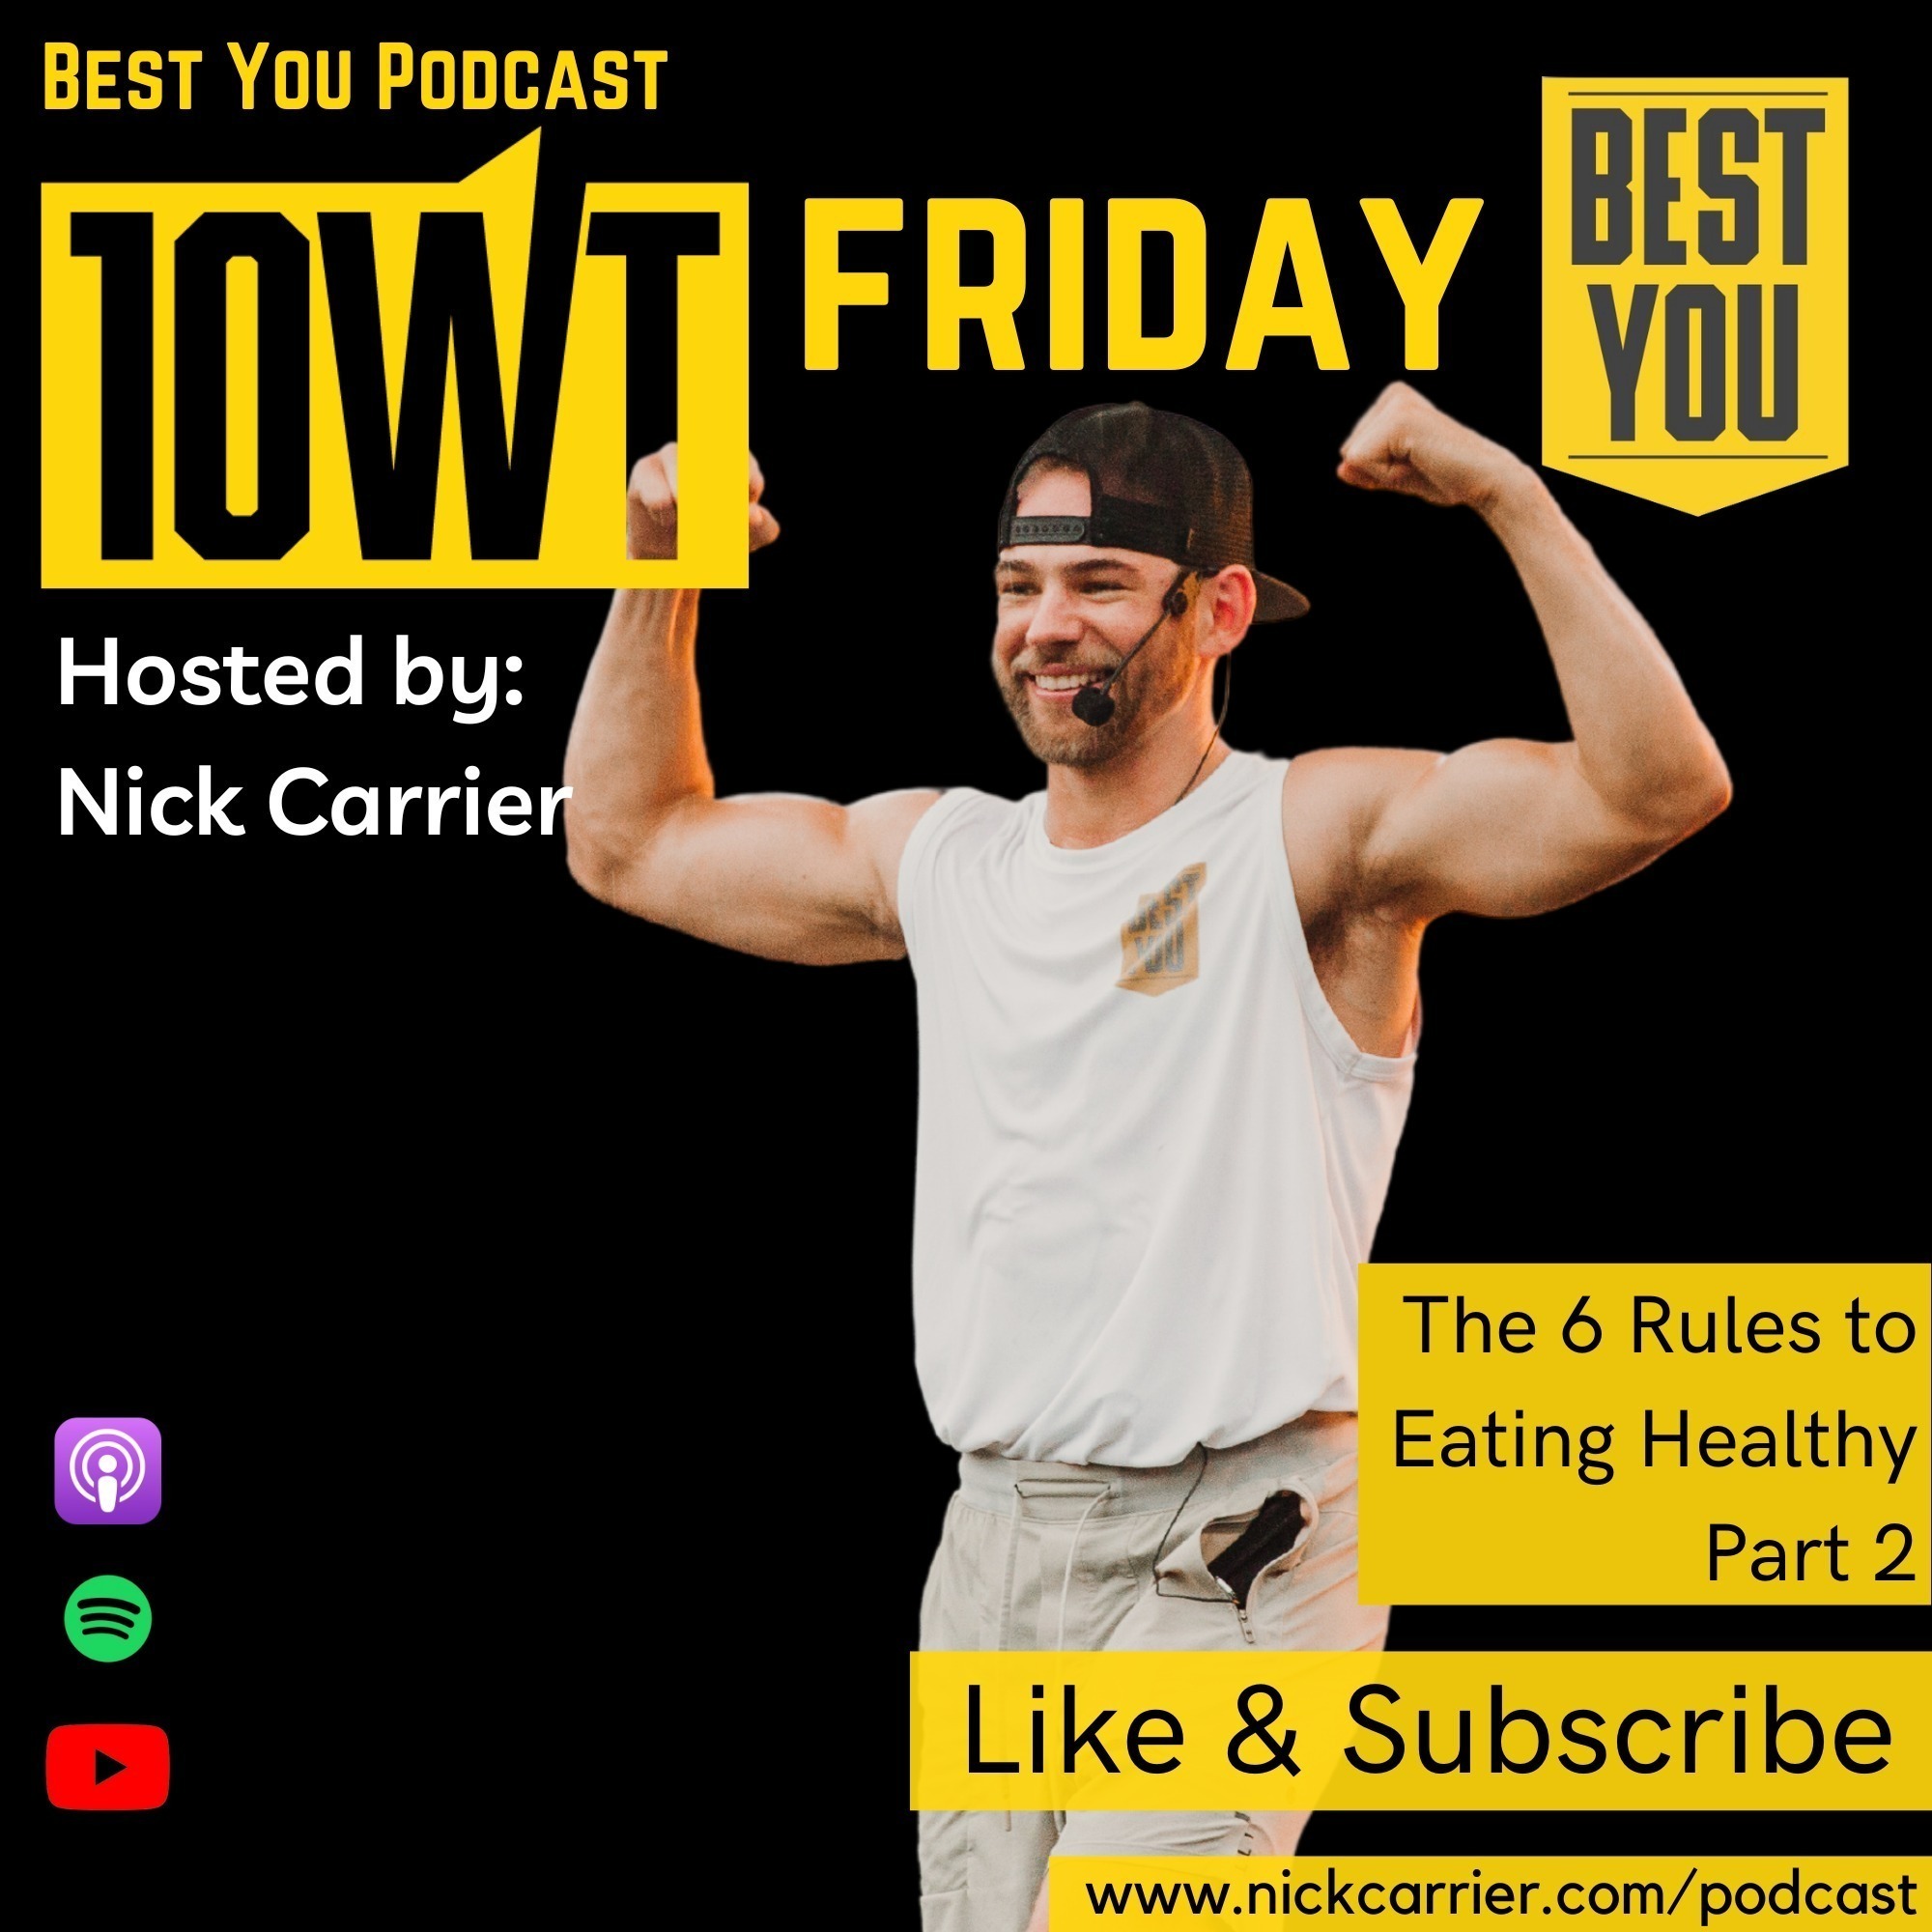 10-WT Friday - The 6 Rules to Eating Healthy - Part 2